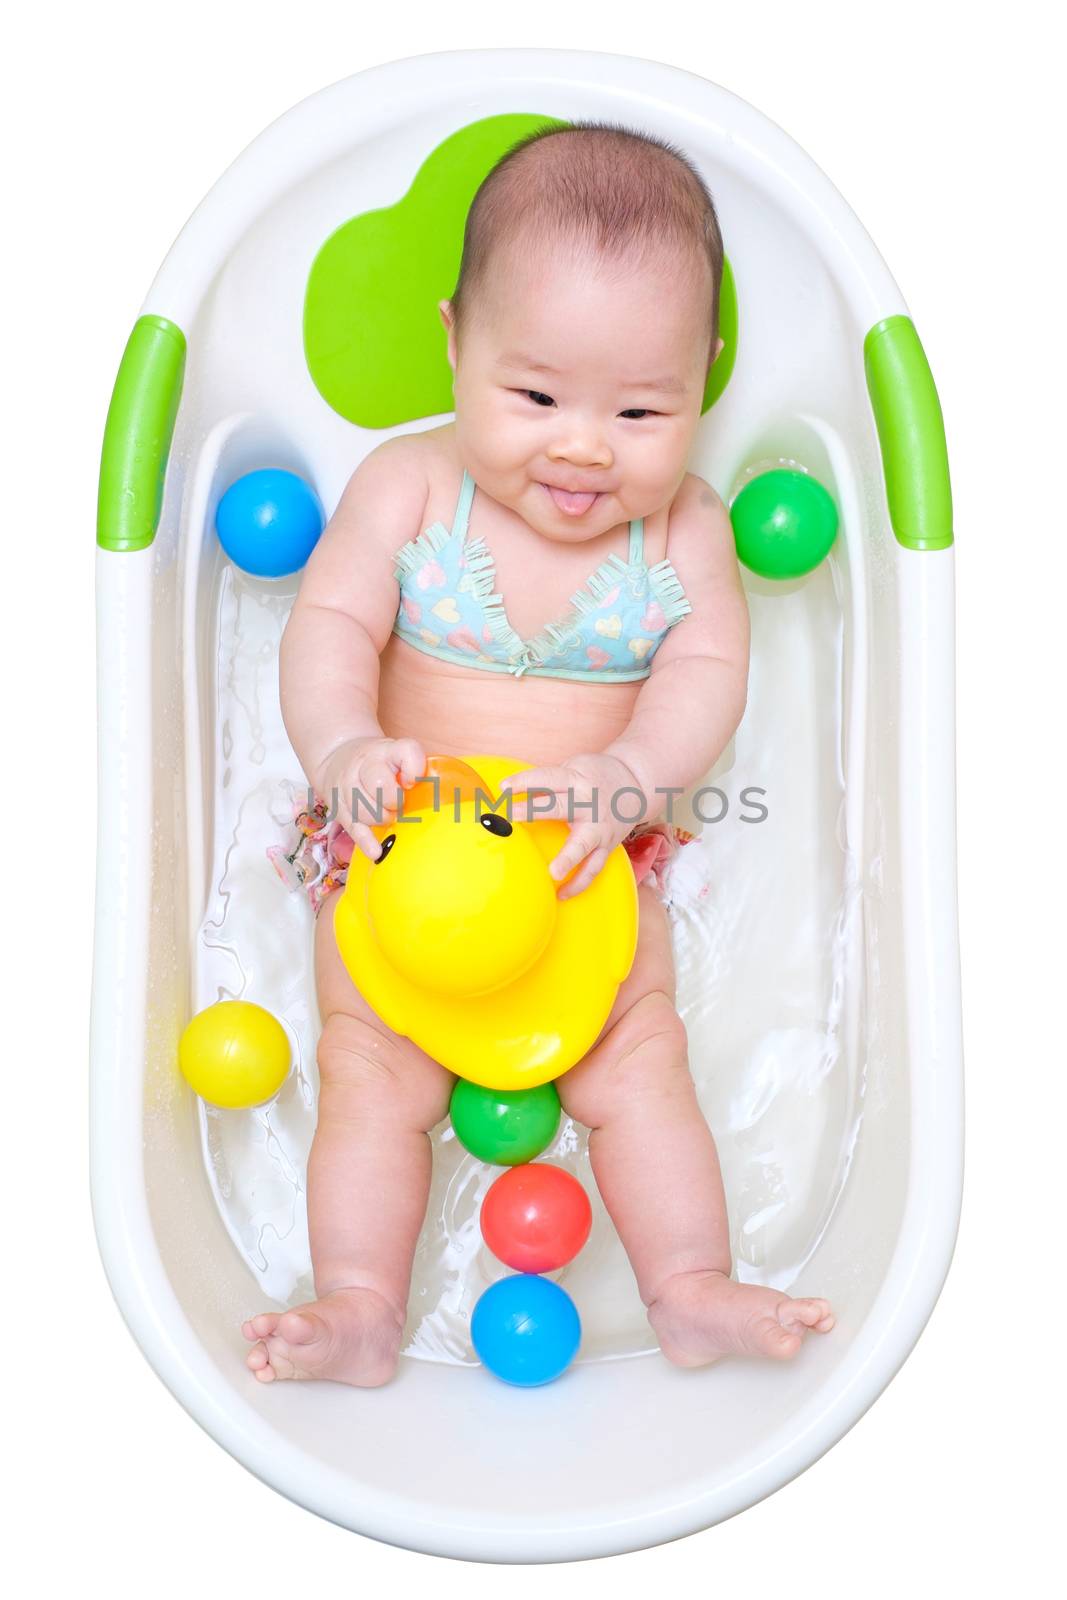 Asian baby girl taking a bath in white tub and playing duck by zneb076